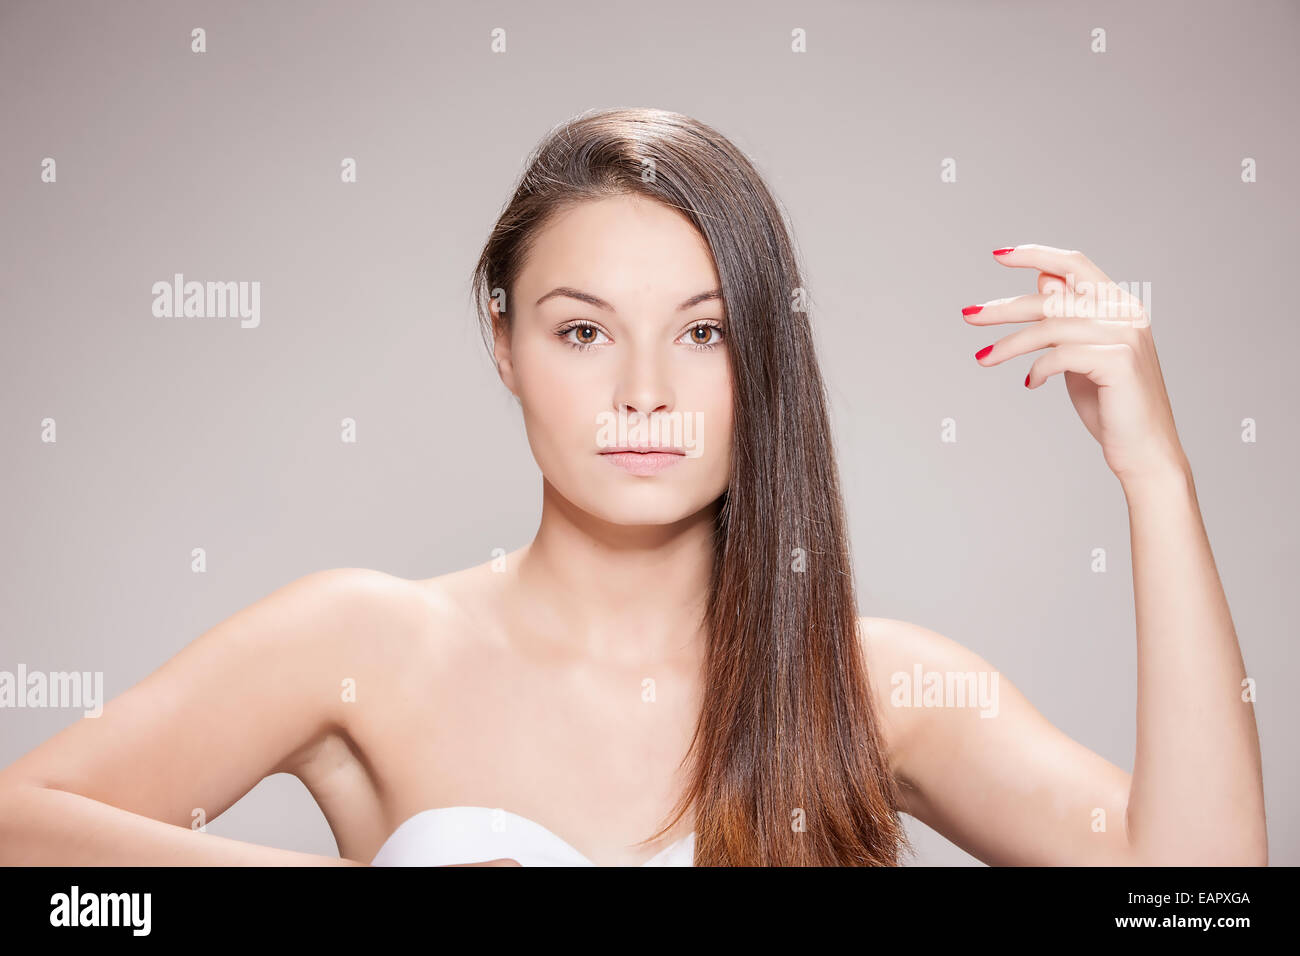 Attractive young woman with brown hair. Stock Photo